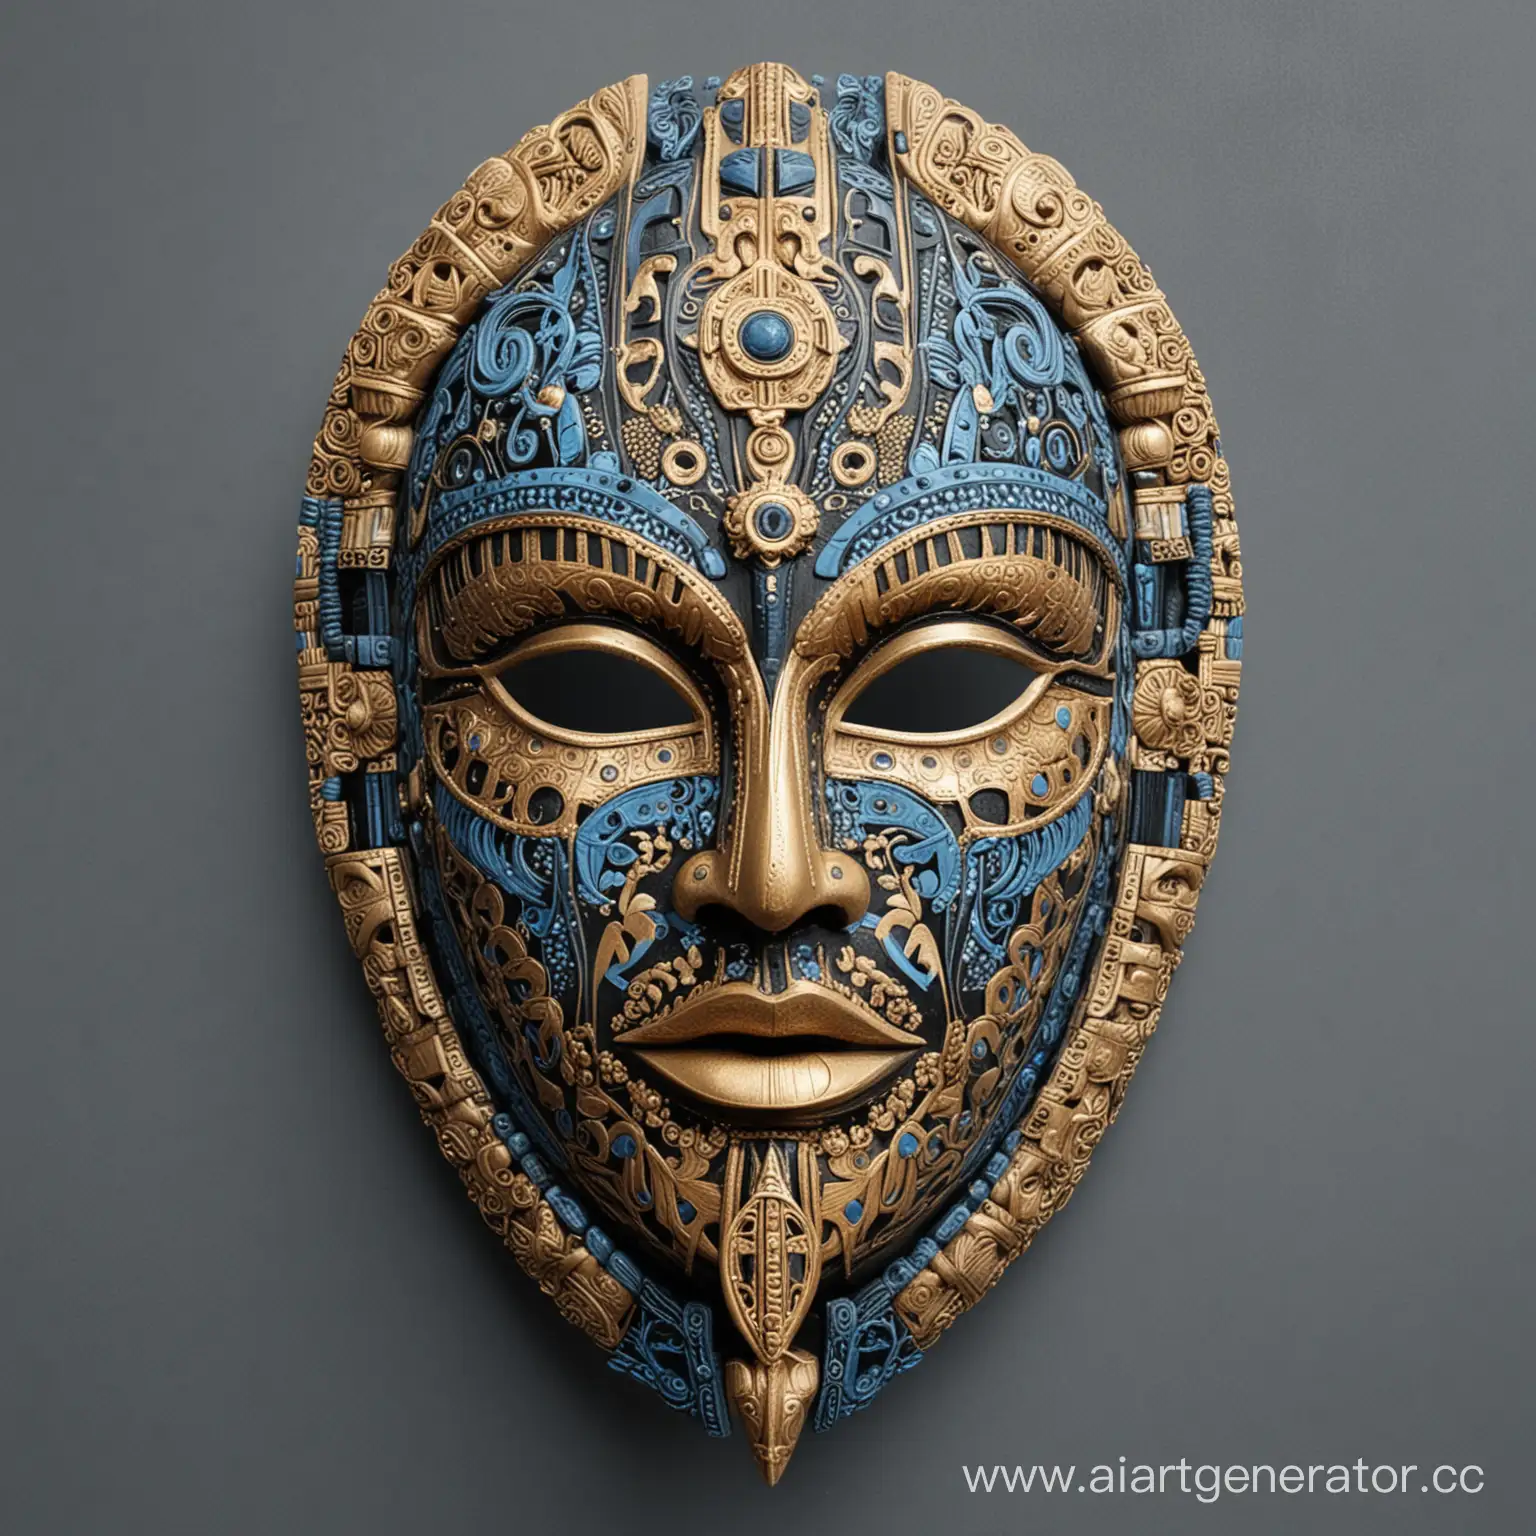 Scandinavian-Vlva-Mask-Art-Symbolic-Ethnic-Intricacy-in-Blue-and-Gold